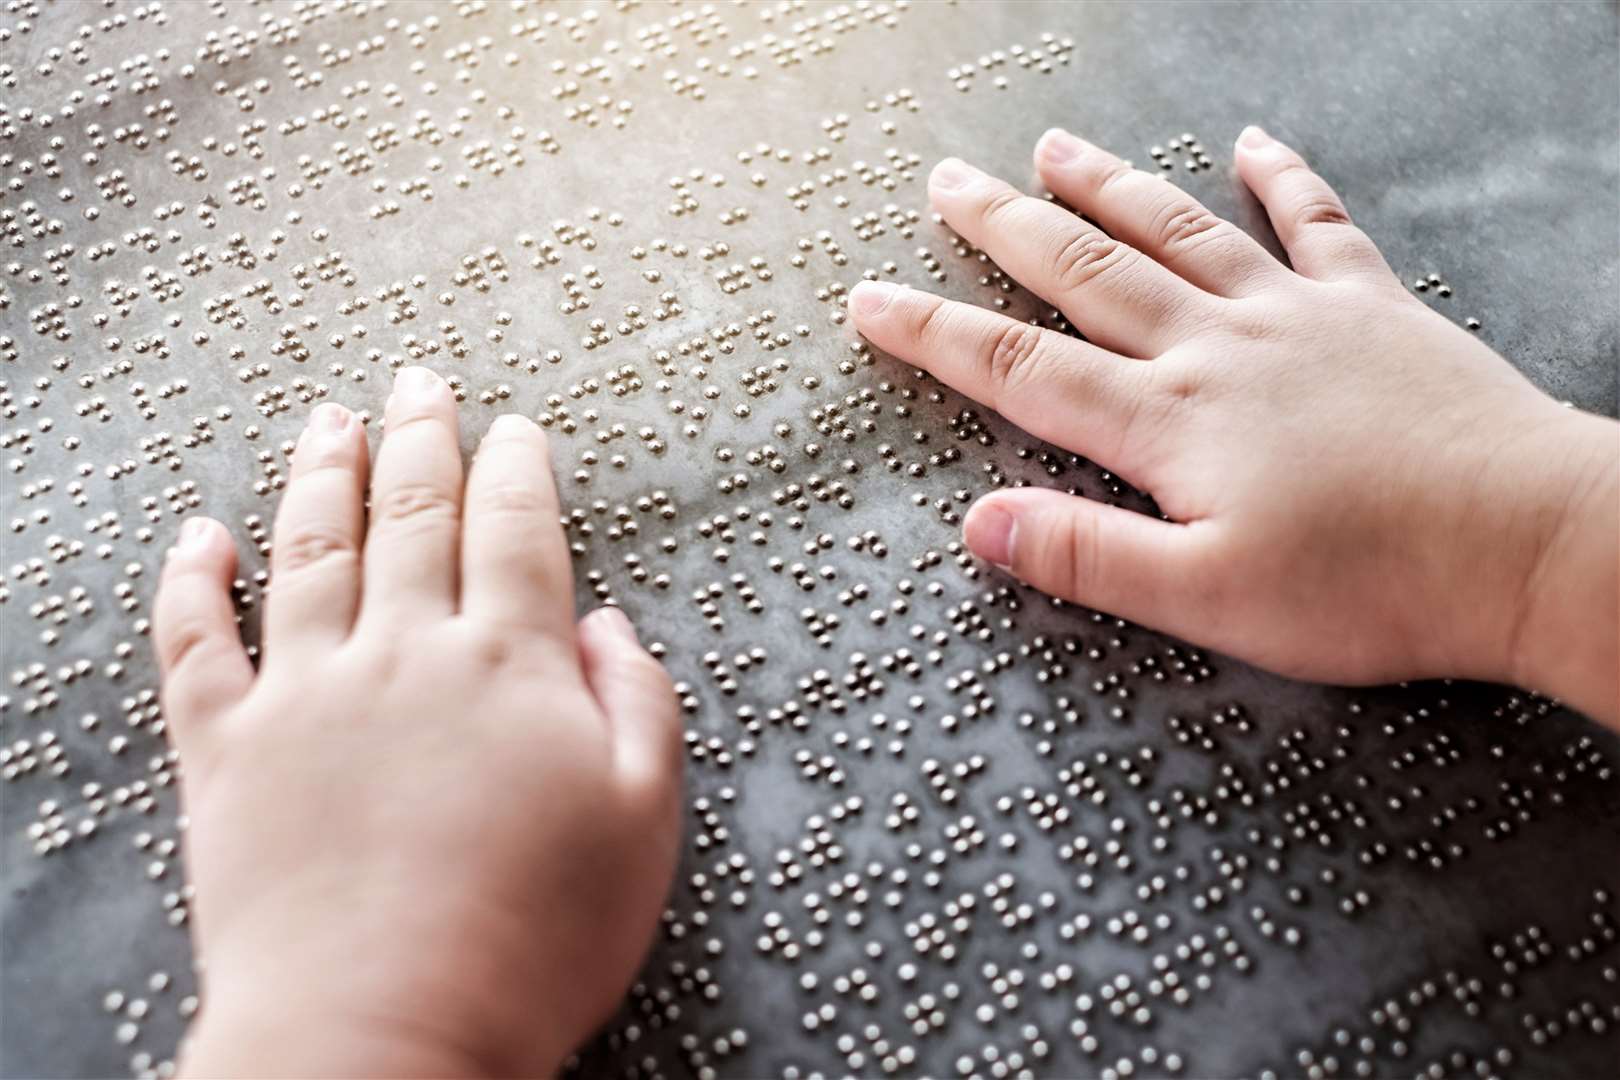 Blind child learns braille.